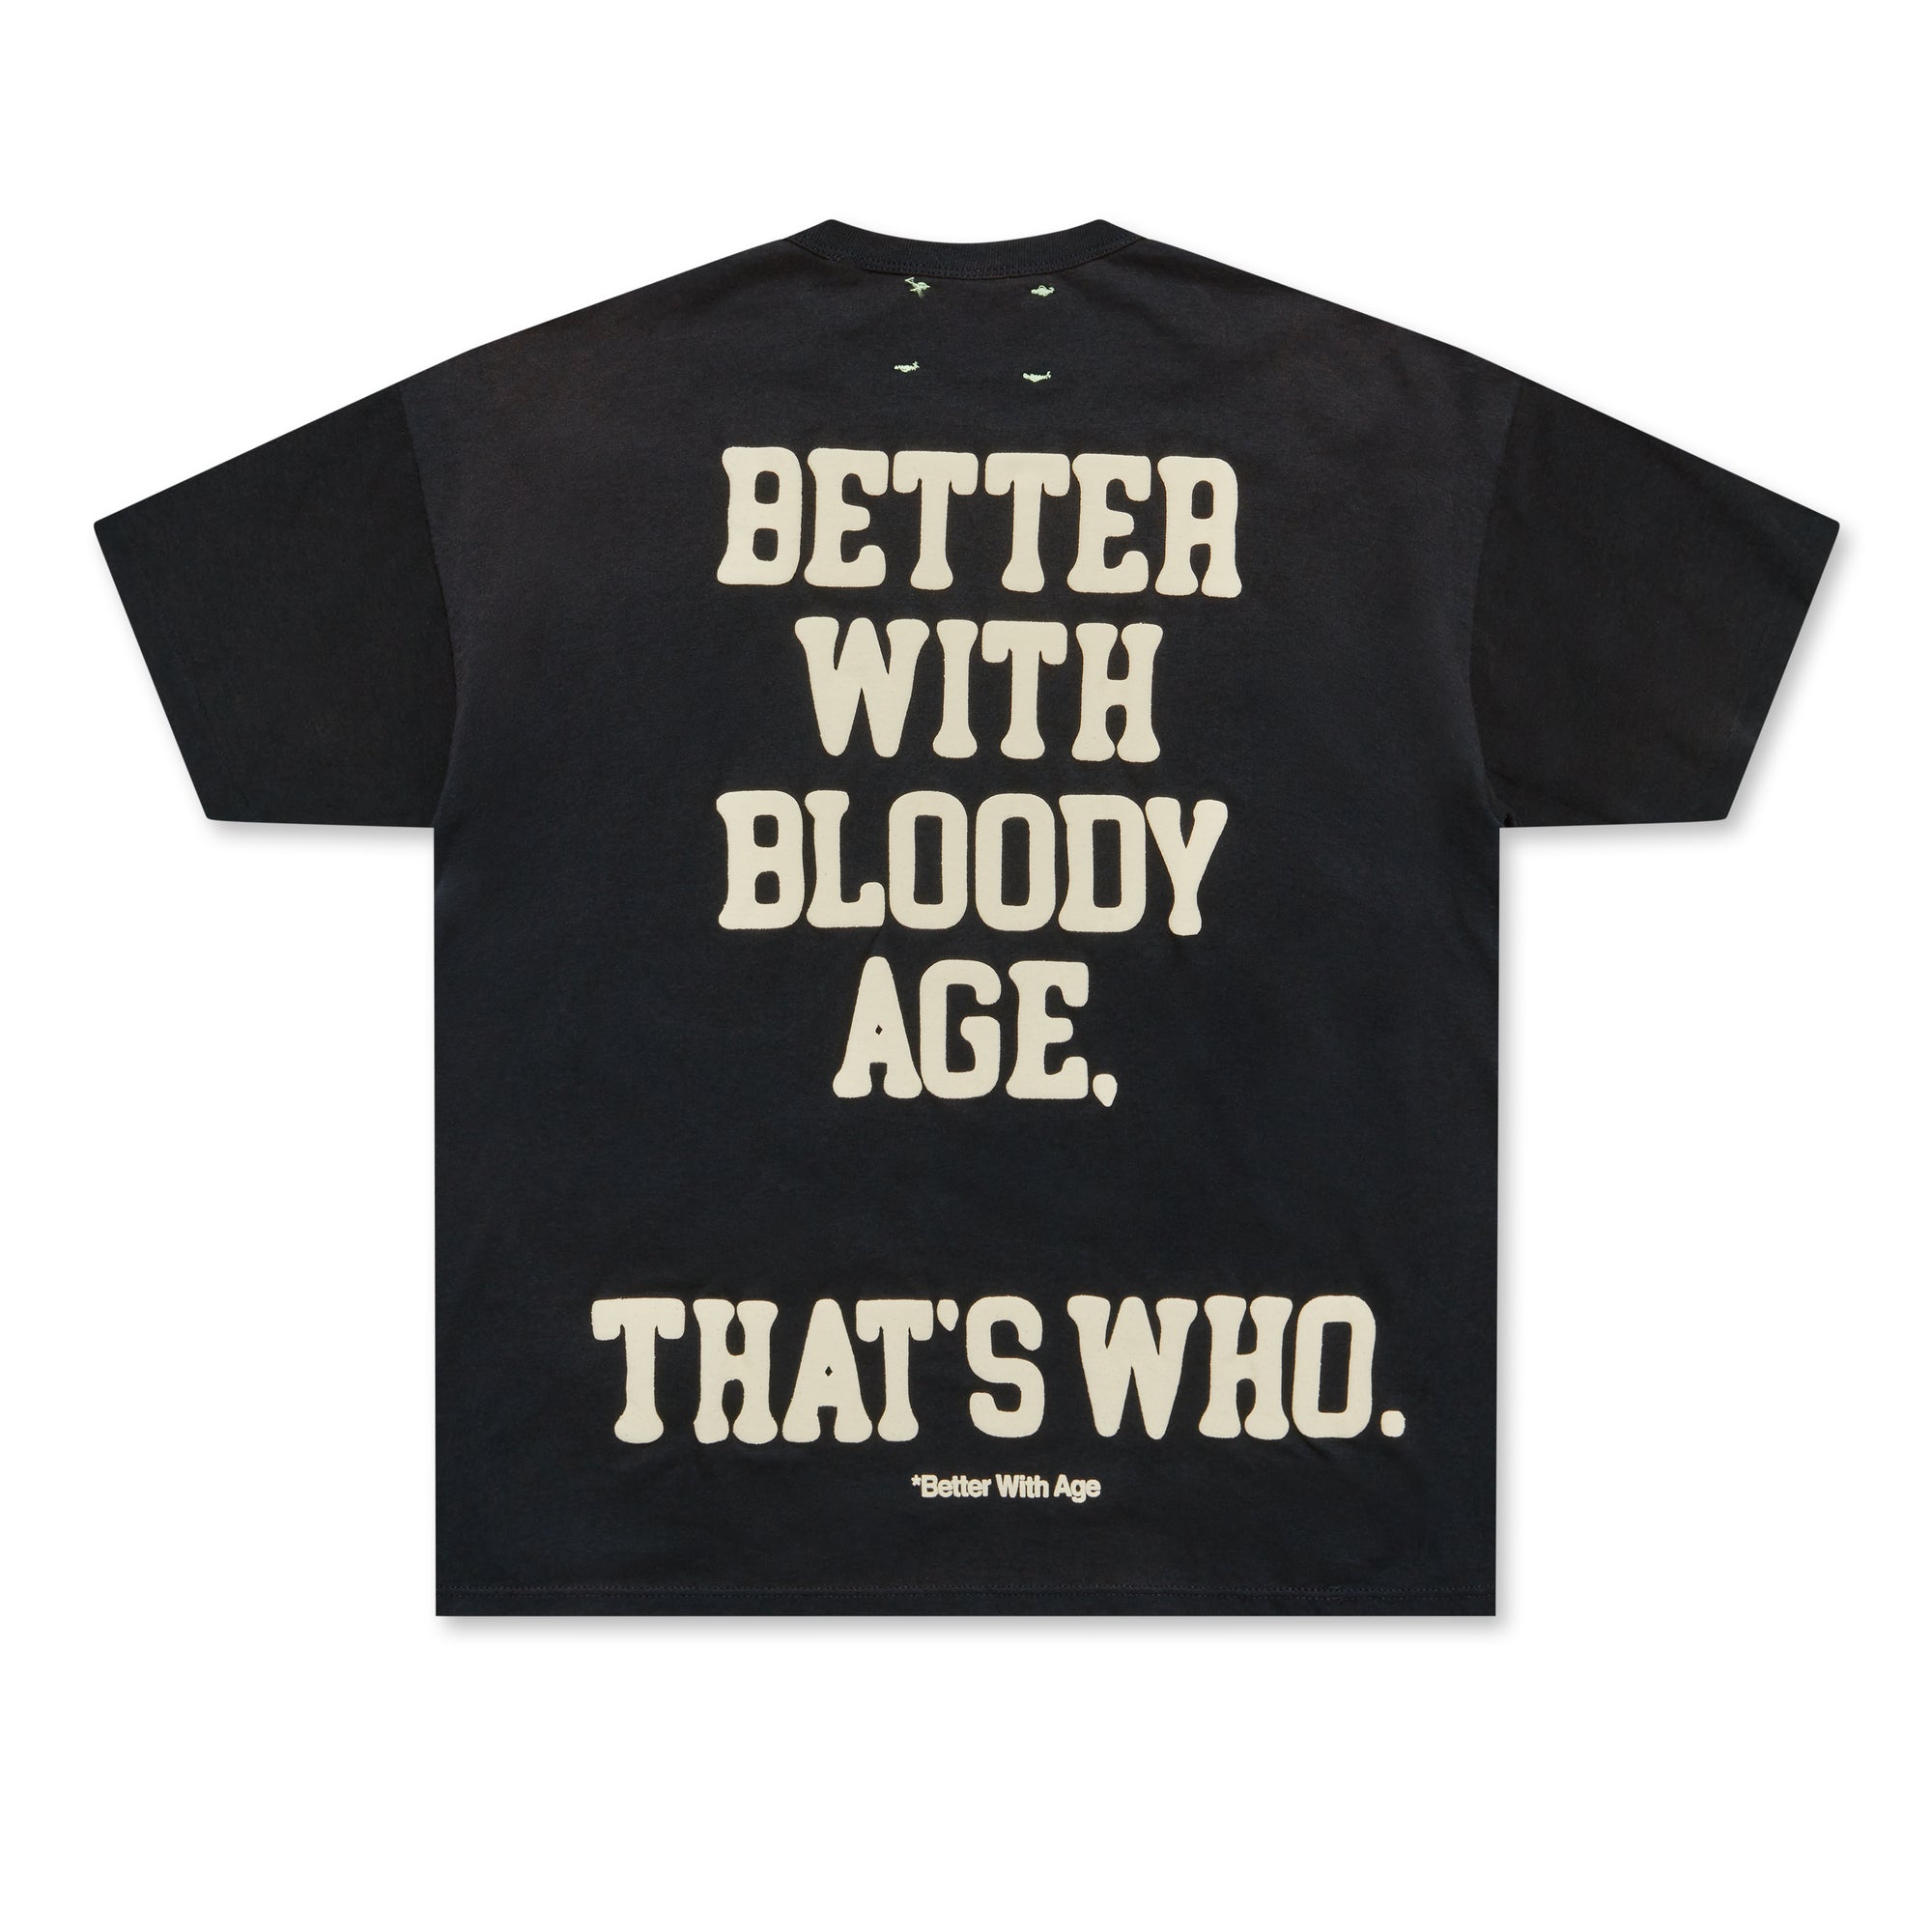 Better With Age - Men's Who? Tee - (Black) view 2